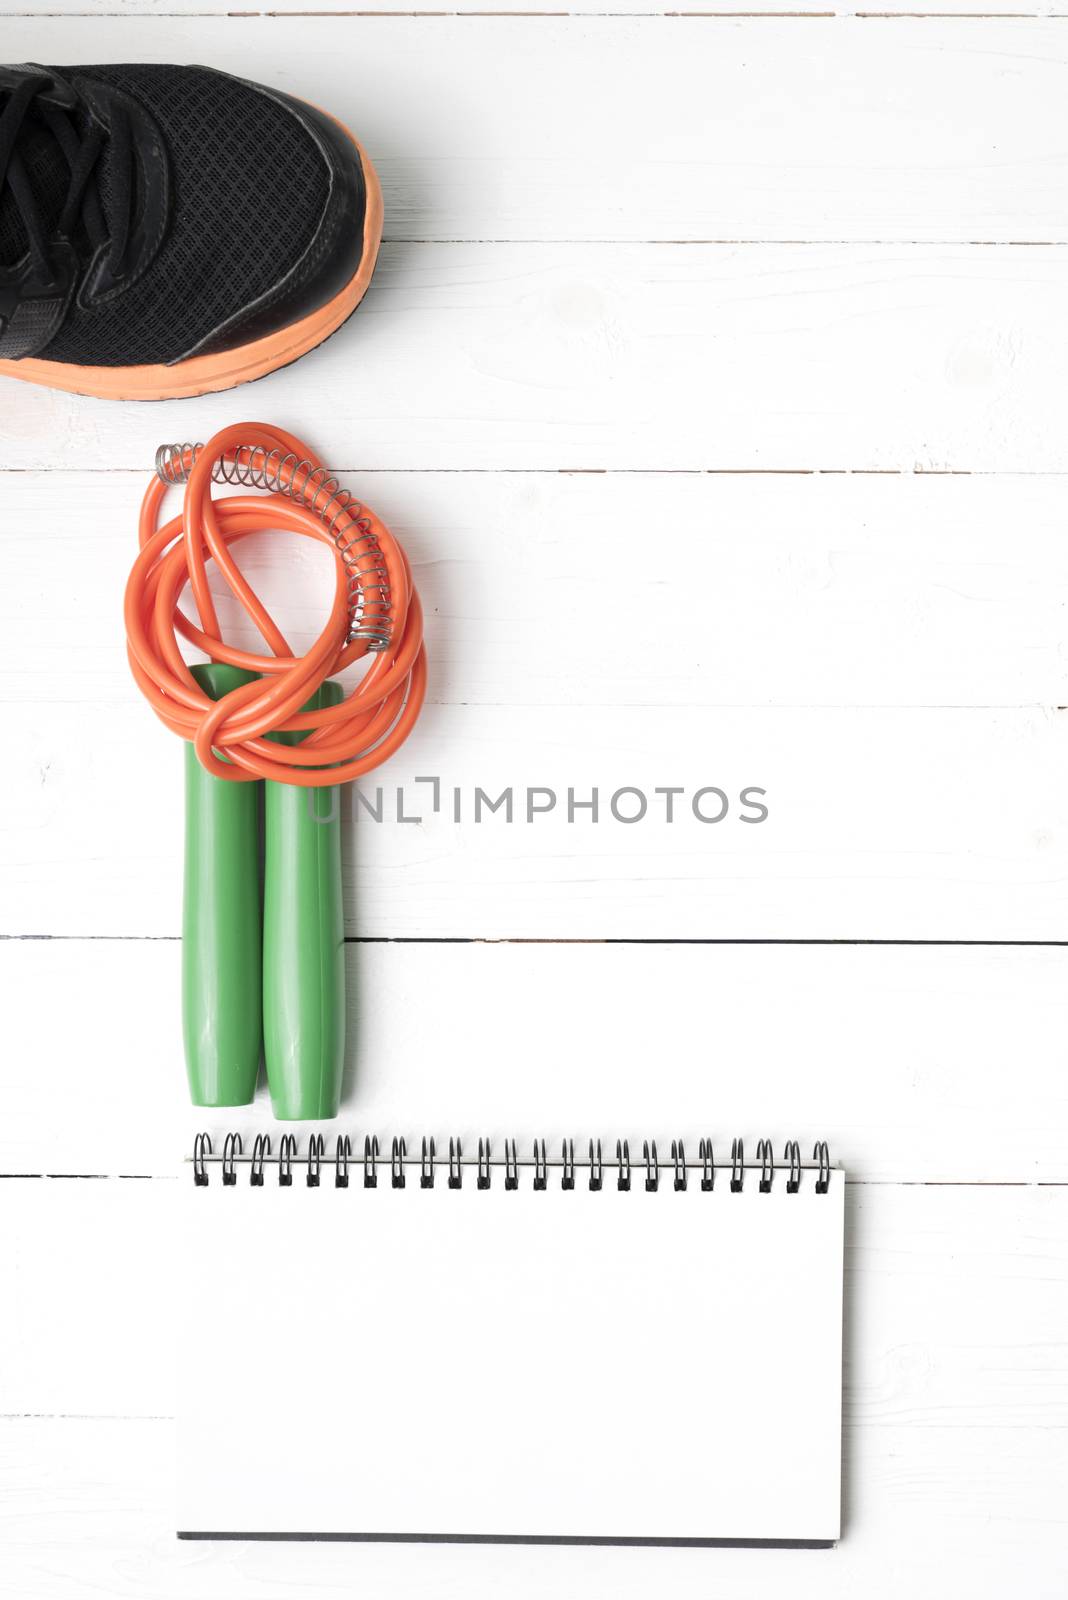 fitness equipment : running shoes,jumping rope and notepad on white wood table